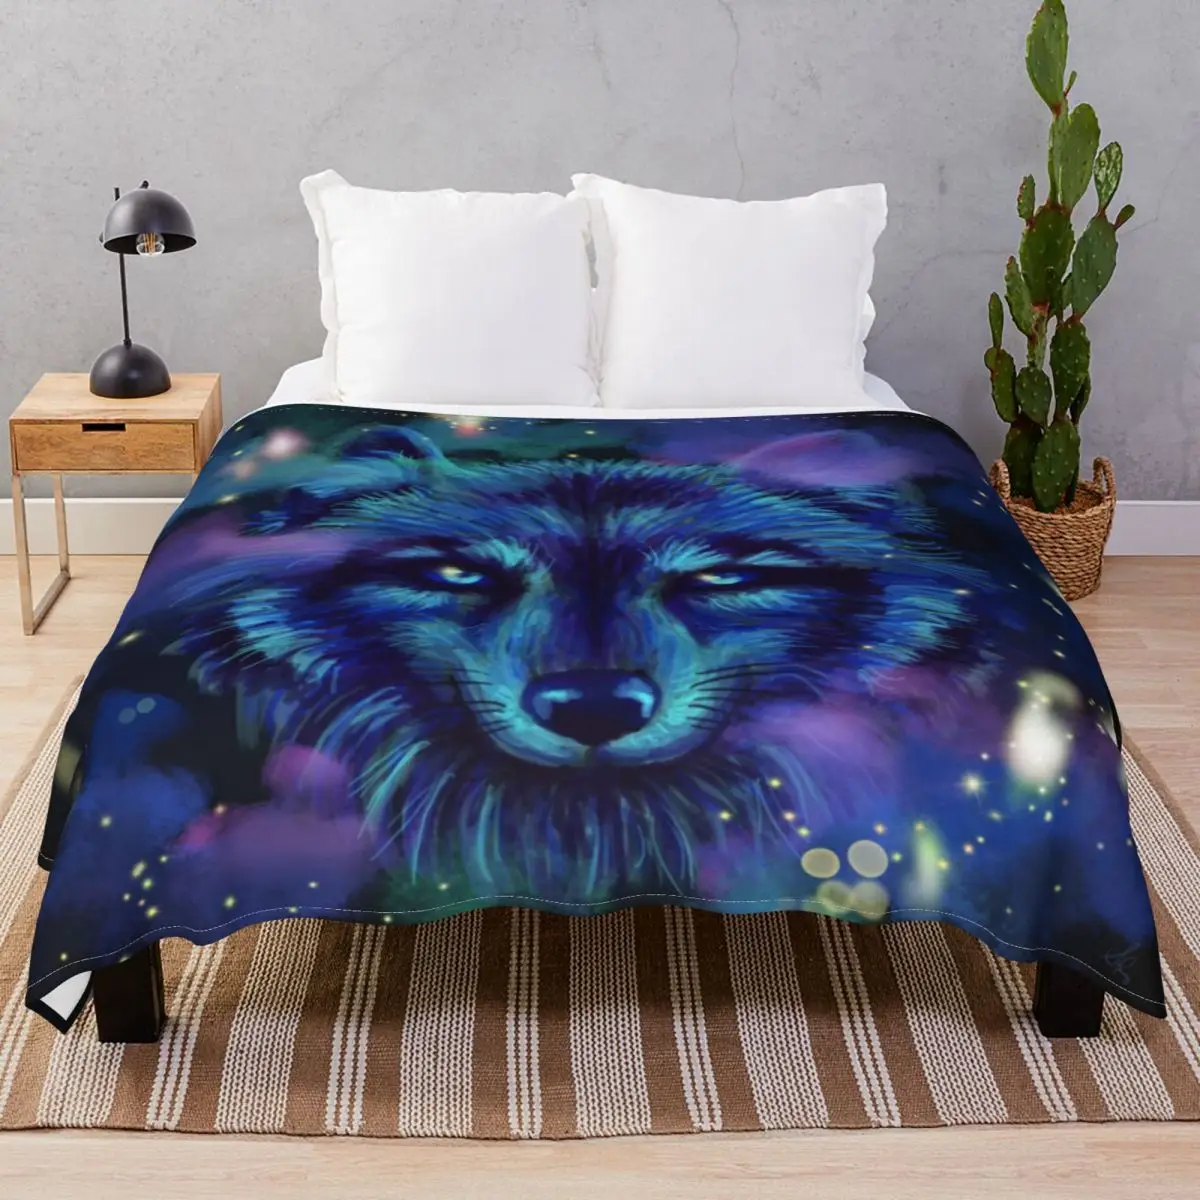 Astral Wolf Blankets Coral Fleece Print Super Soft Unisex Throw Blanket for Bed Home Couch Camp Office